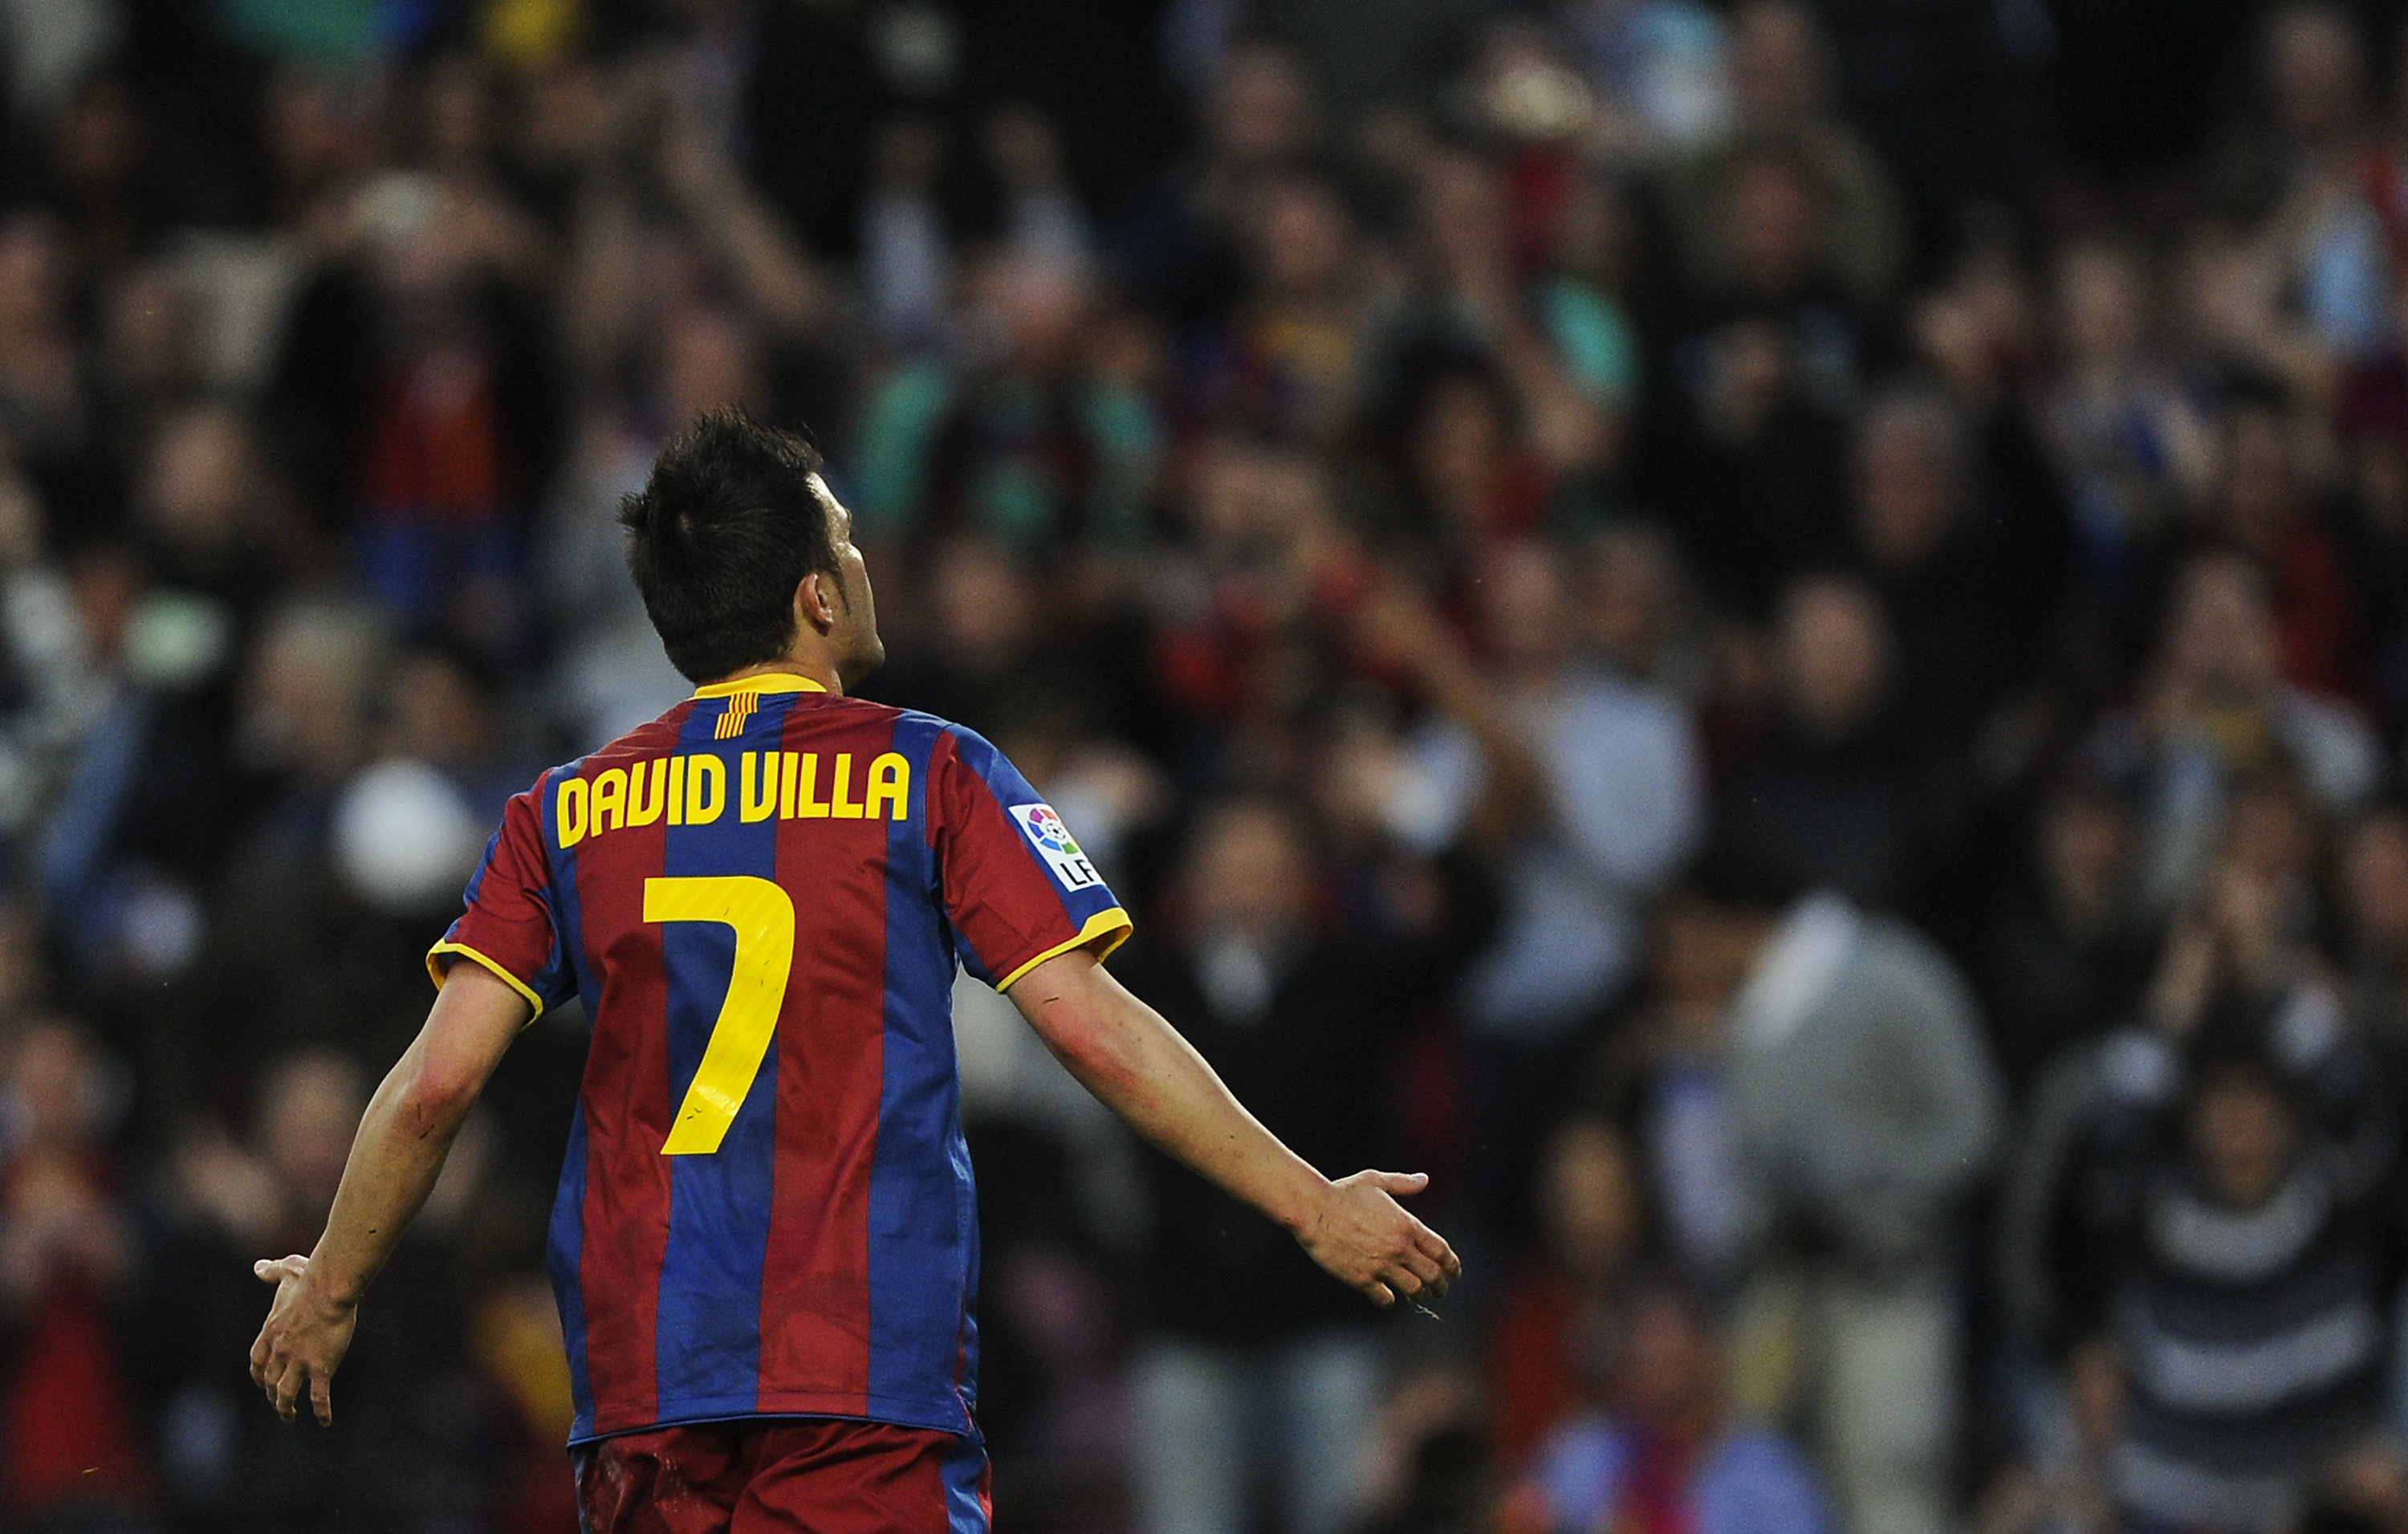 BARCELONA, SPAIN - APRIL 23: David Villa of Barcelona celebrates after scoring his first team's side goal during the La Liga match between Barcelona and CA Osasuna at Camp Nou Stadium on April 23, 2011 in Barcelona, Spain.  (Photo by David Ramos/Getty Ima